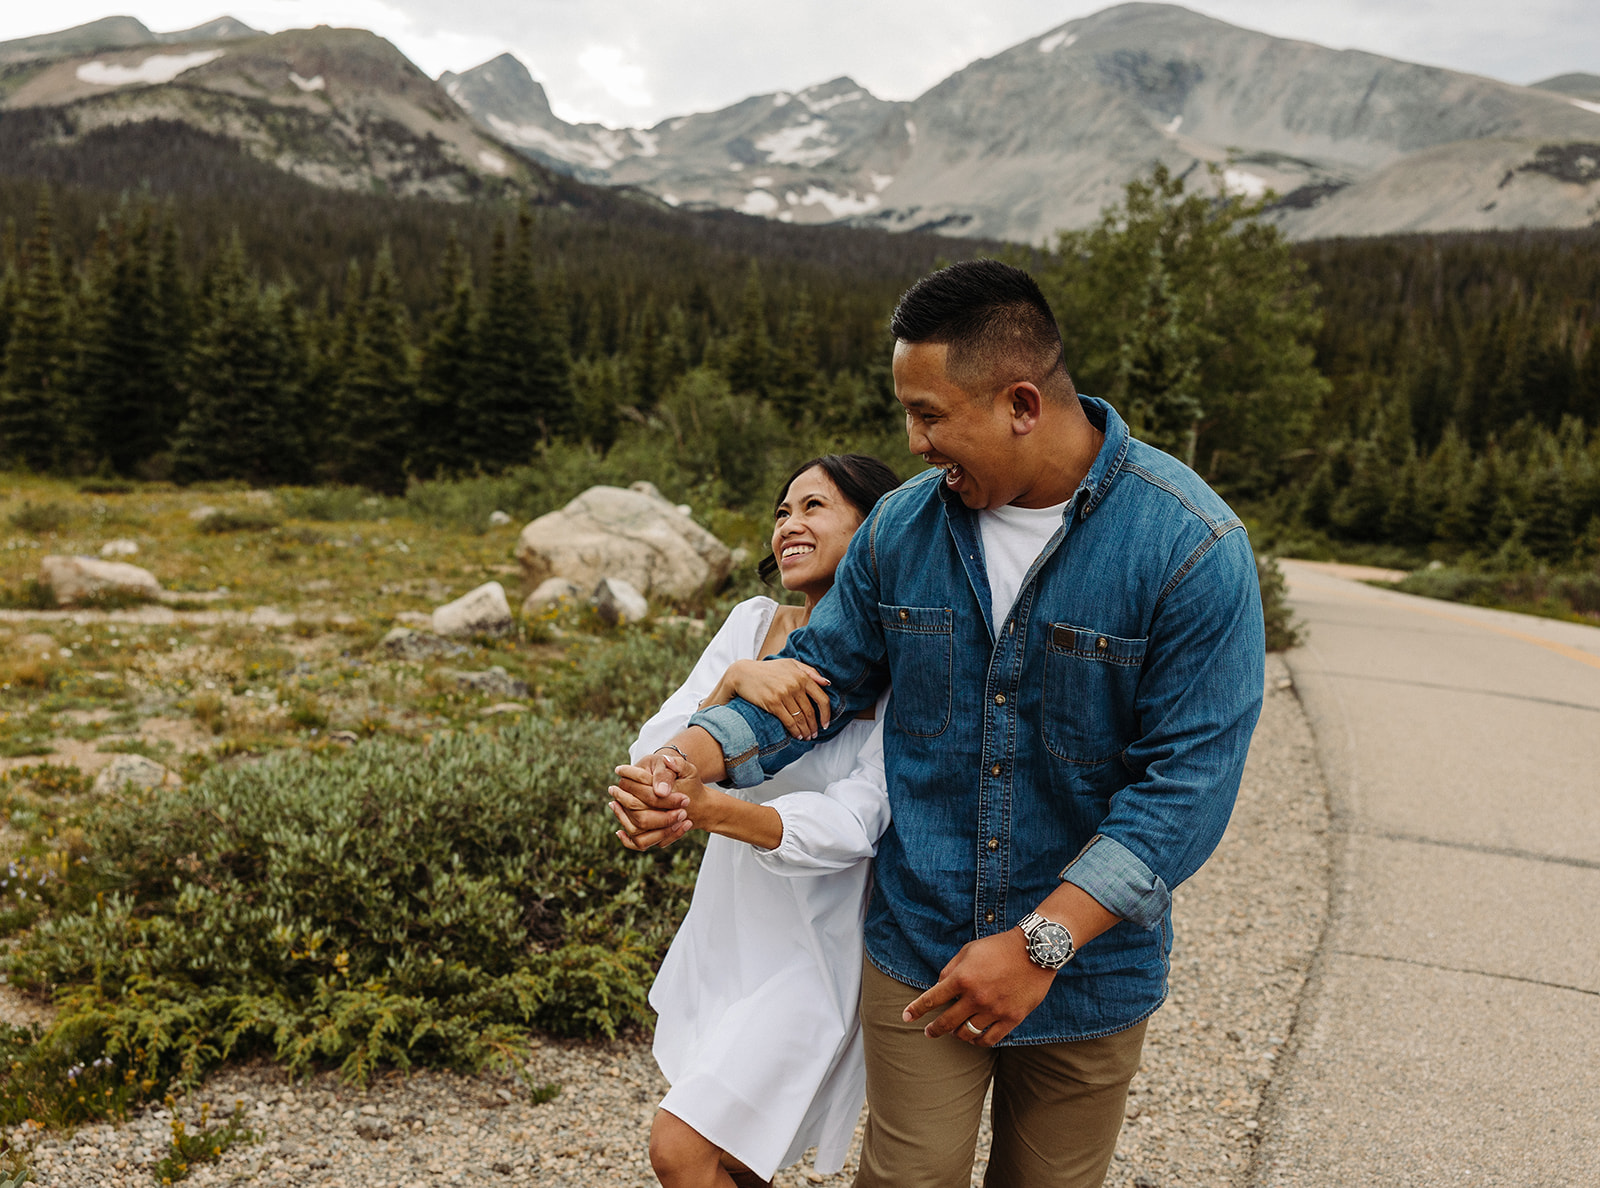 Engaged couple walk down a path in a grassy area in the mountains as the man's fiance holds his arm and smiles.